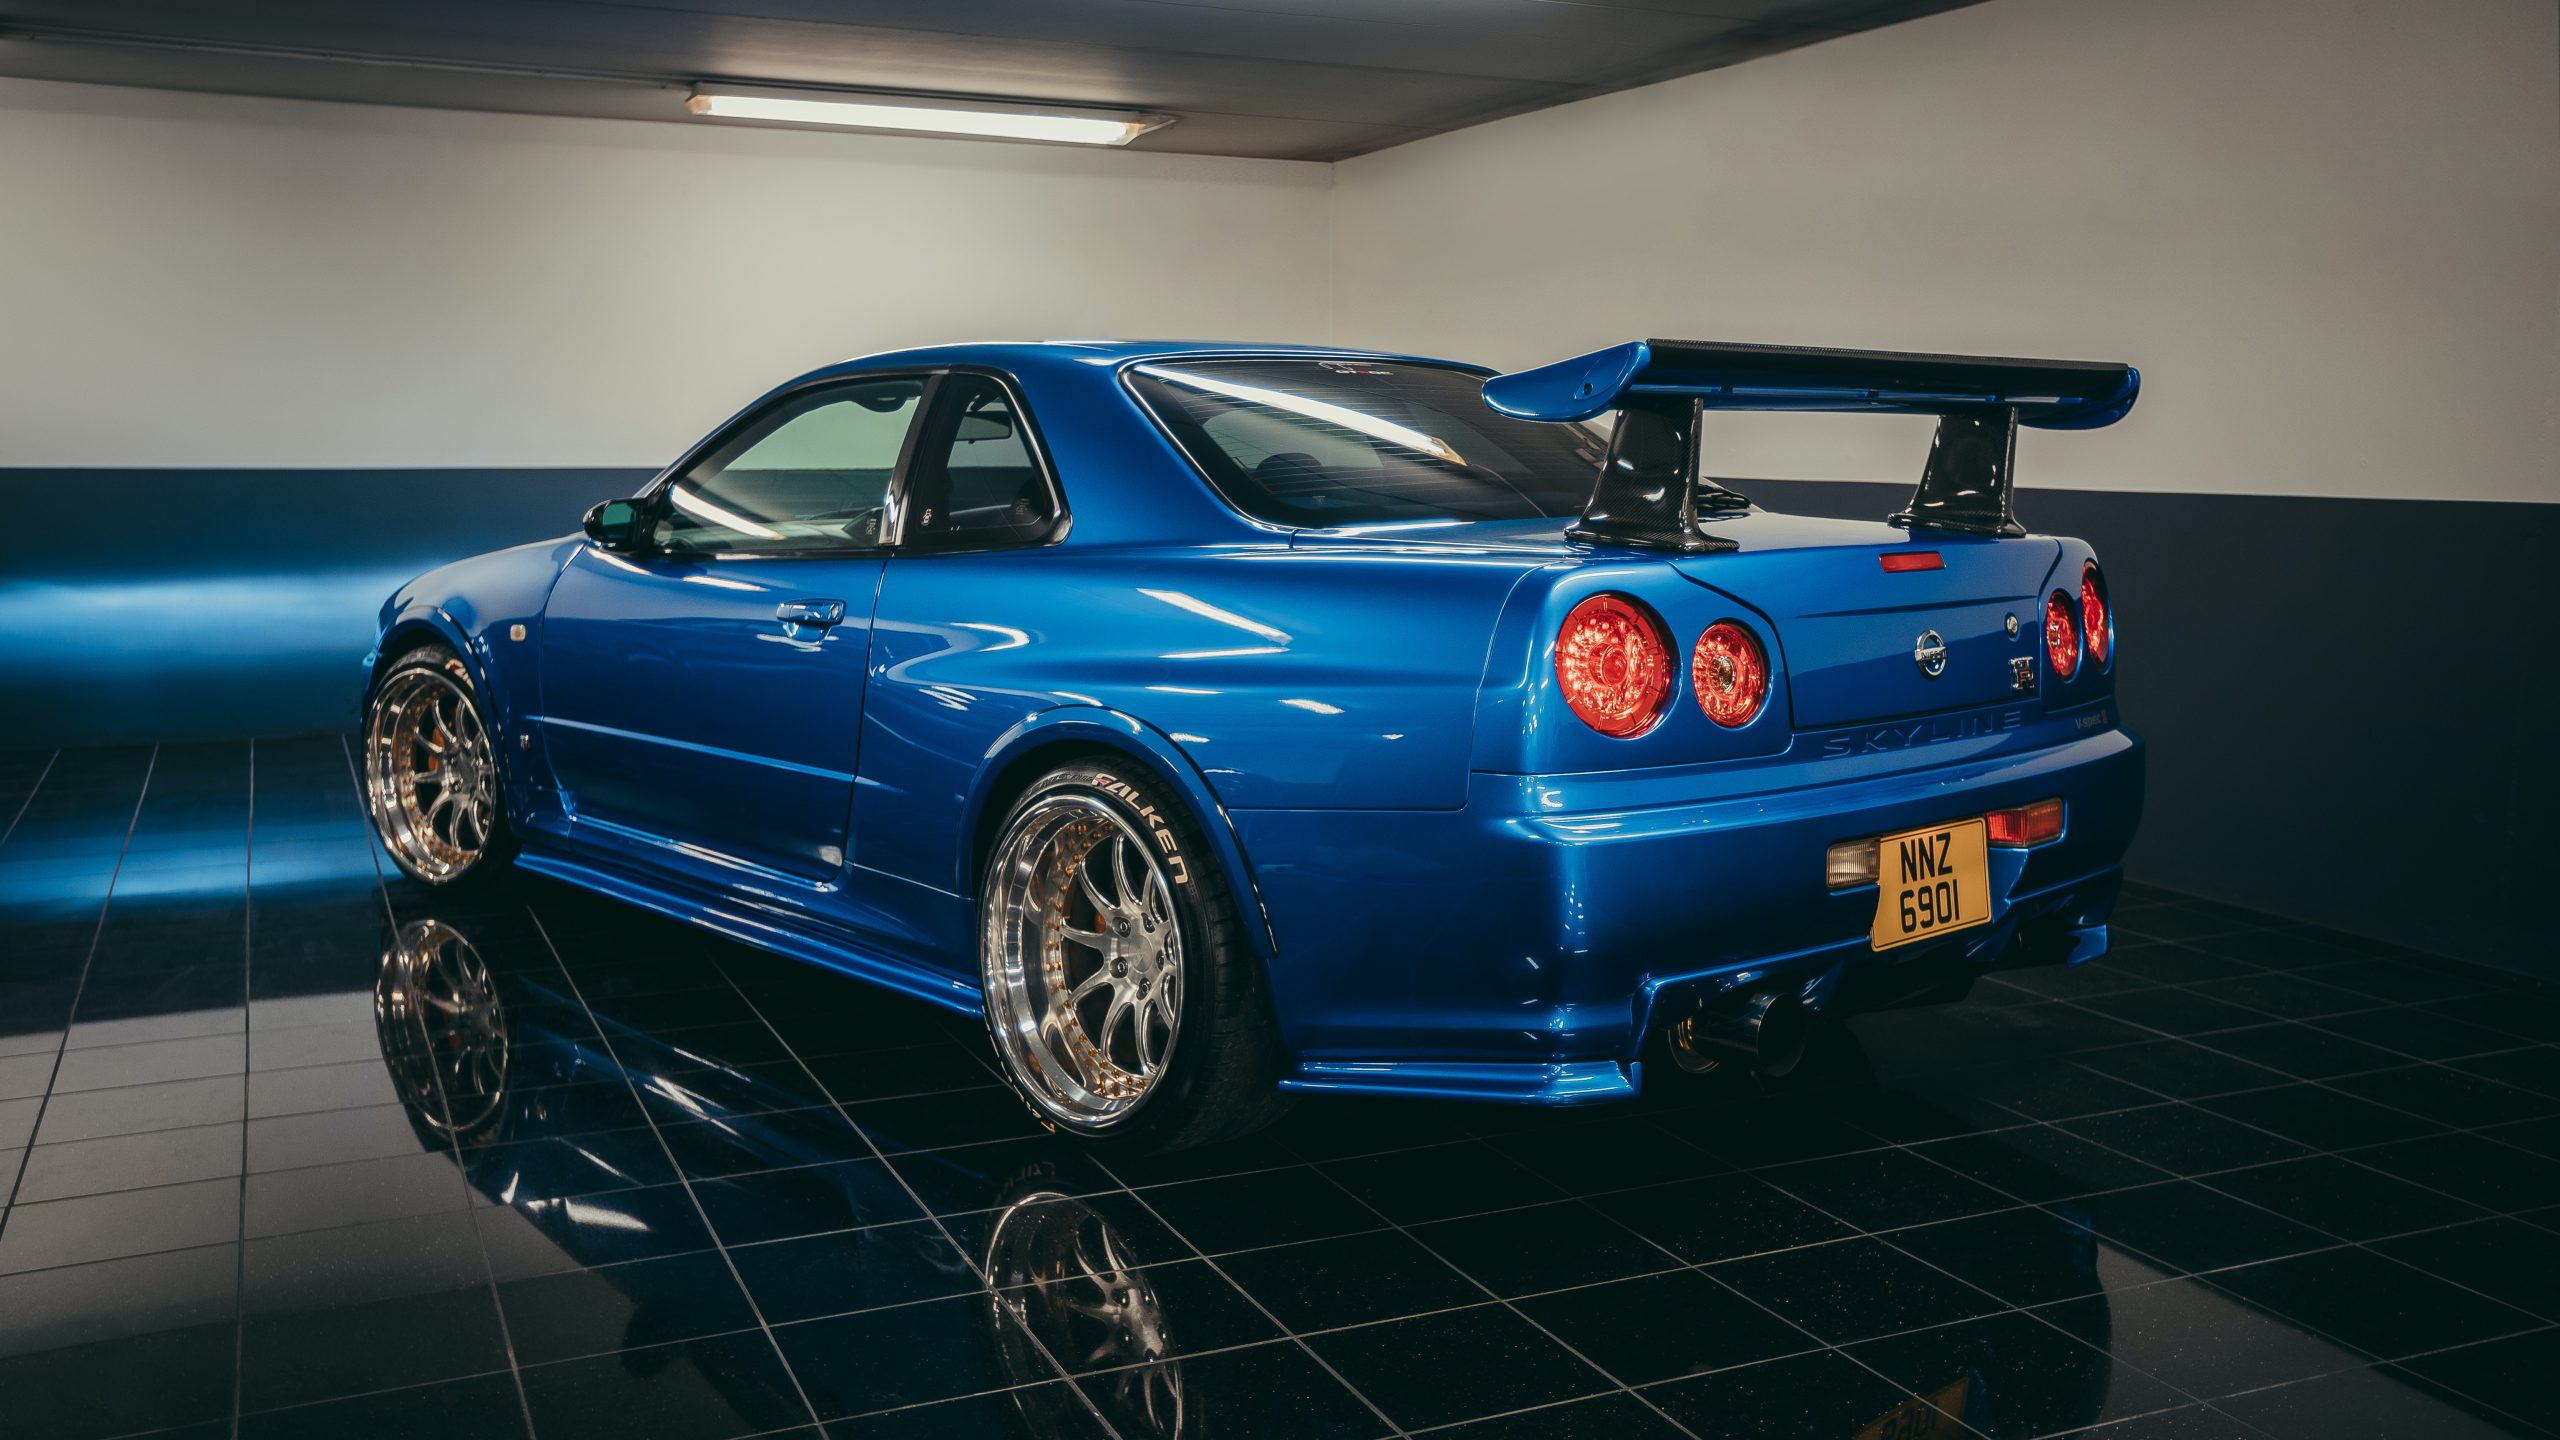 Nissan GT-R with blue color